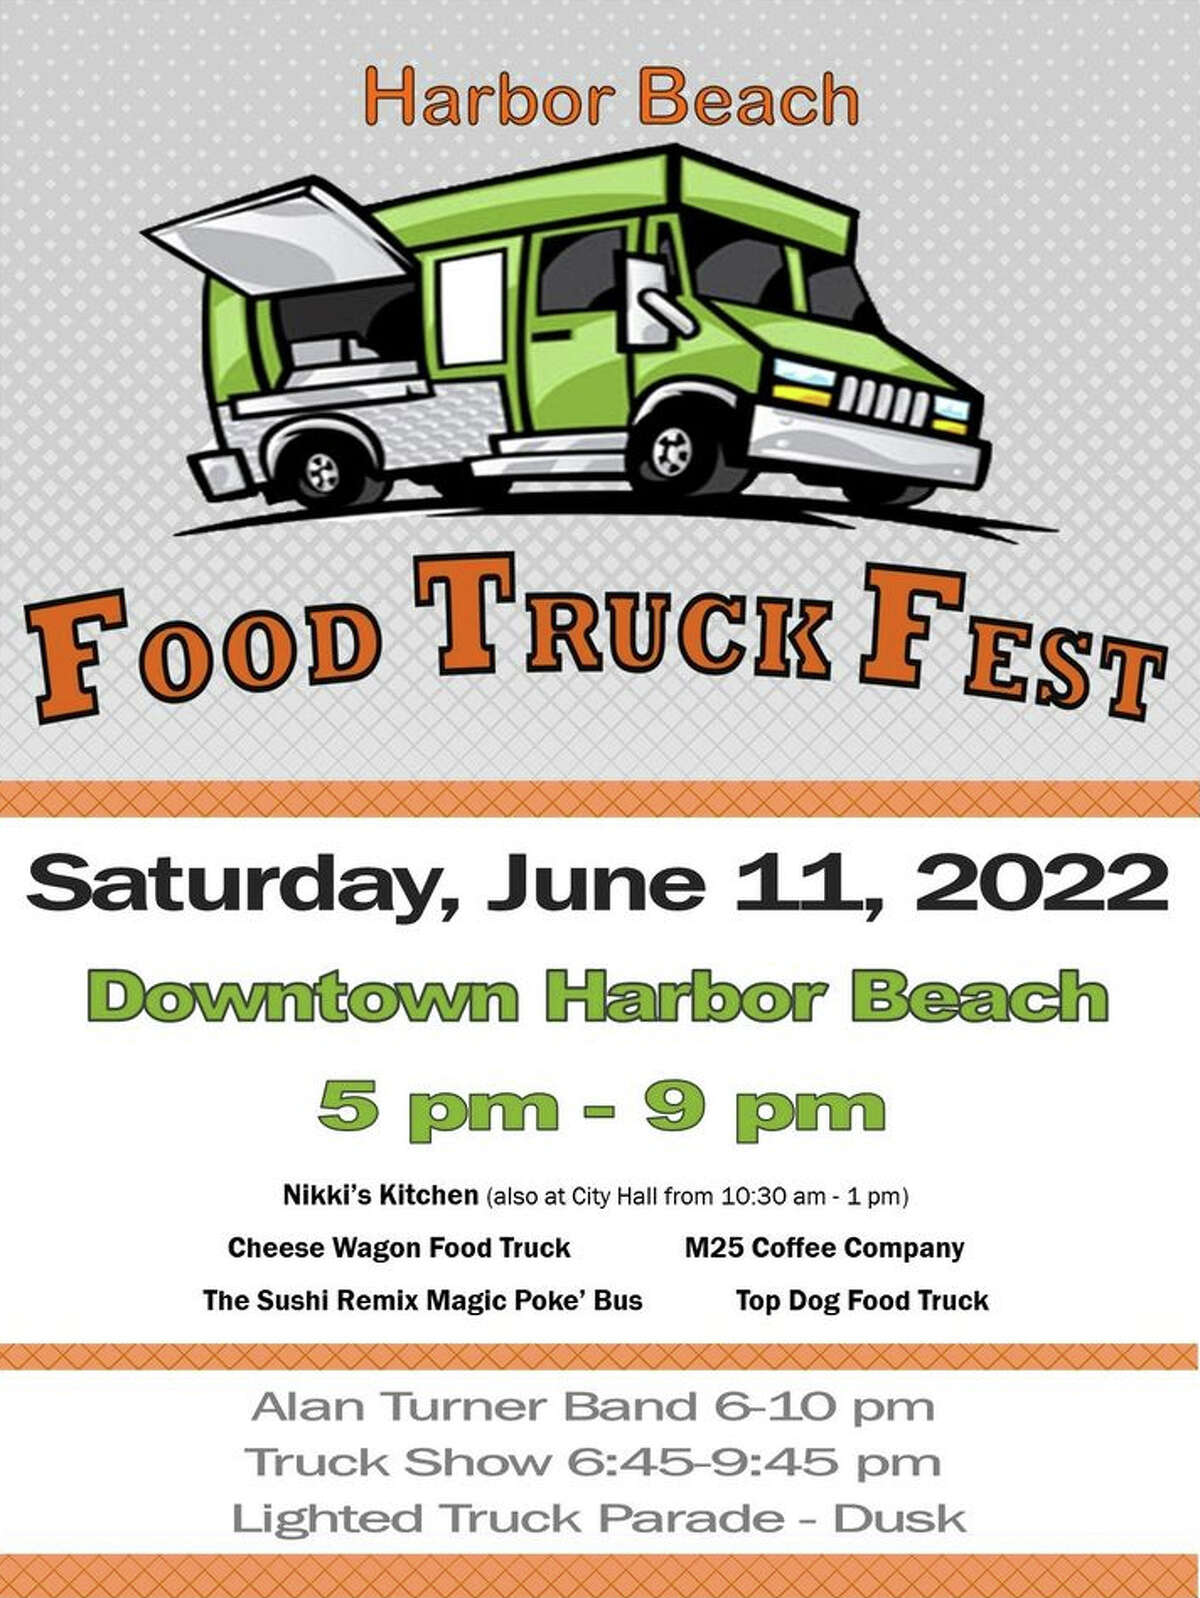 The first Harbor Beach Food Truck Fest will take place the same day as the Harbor Beach truck convoy. Participating trucks will be lined along State Street.